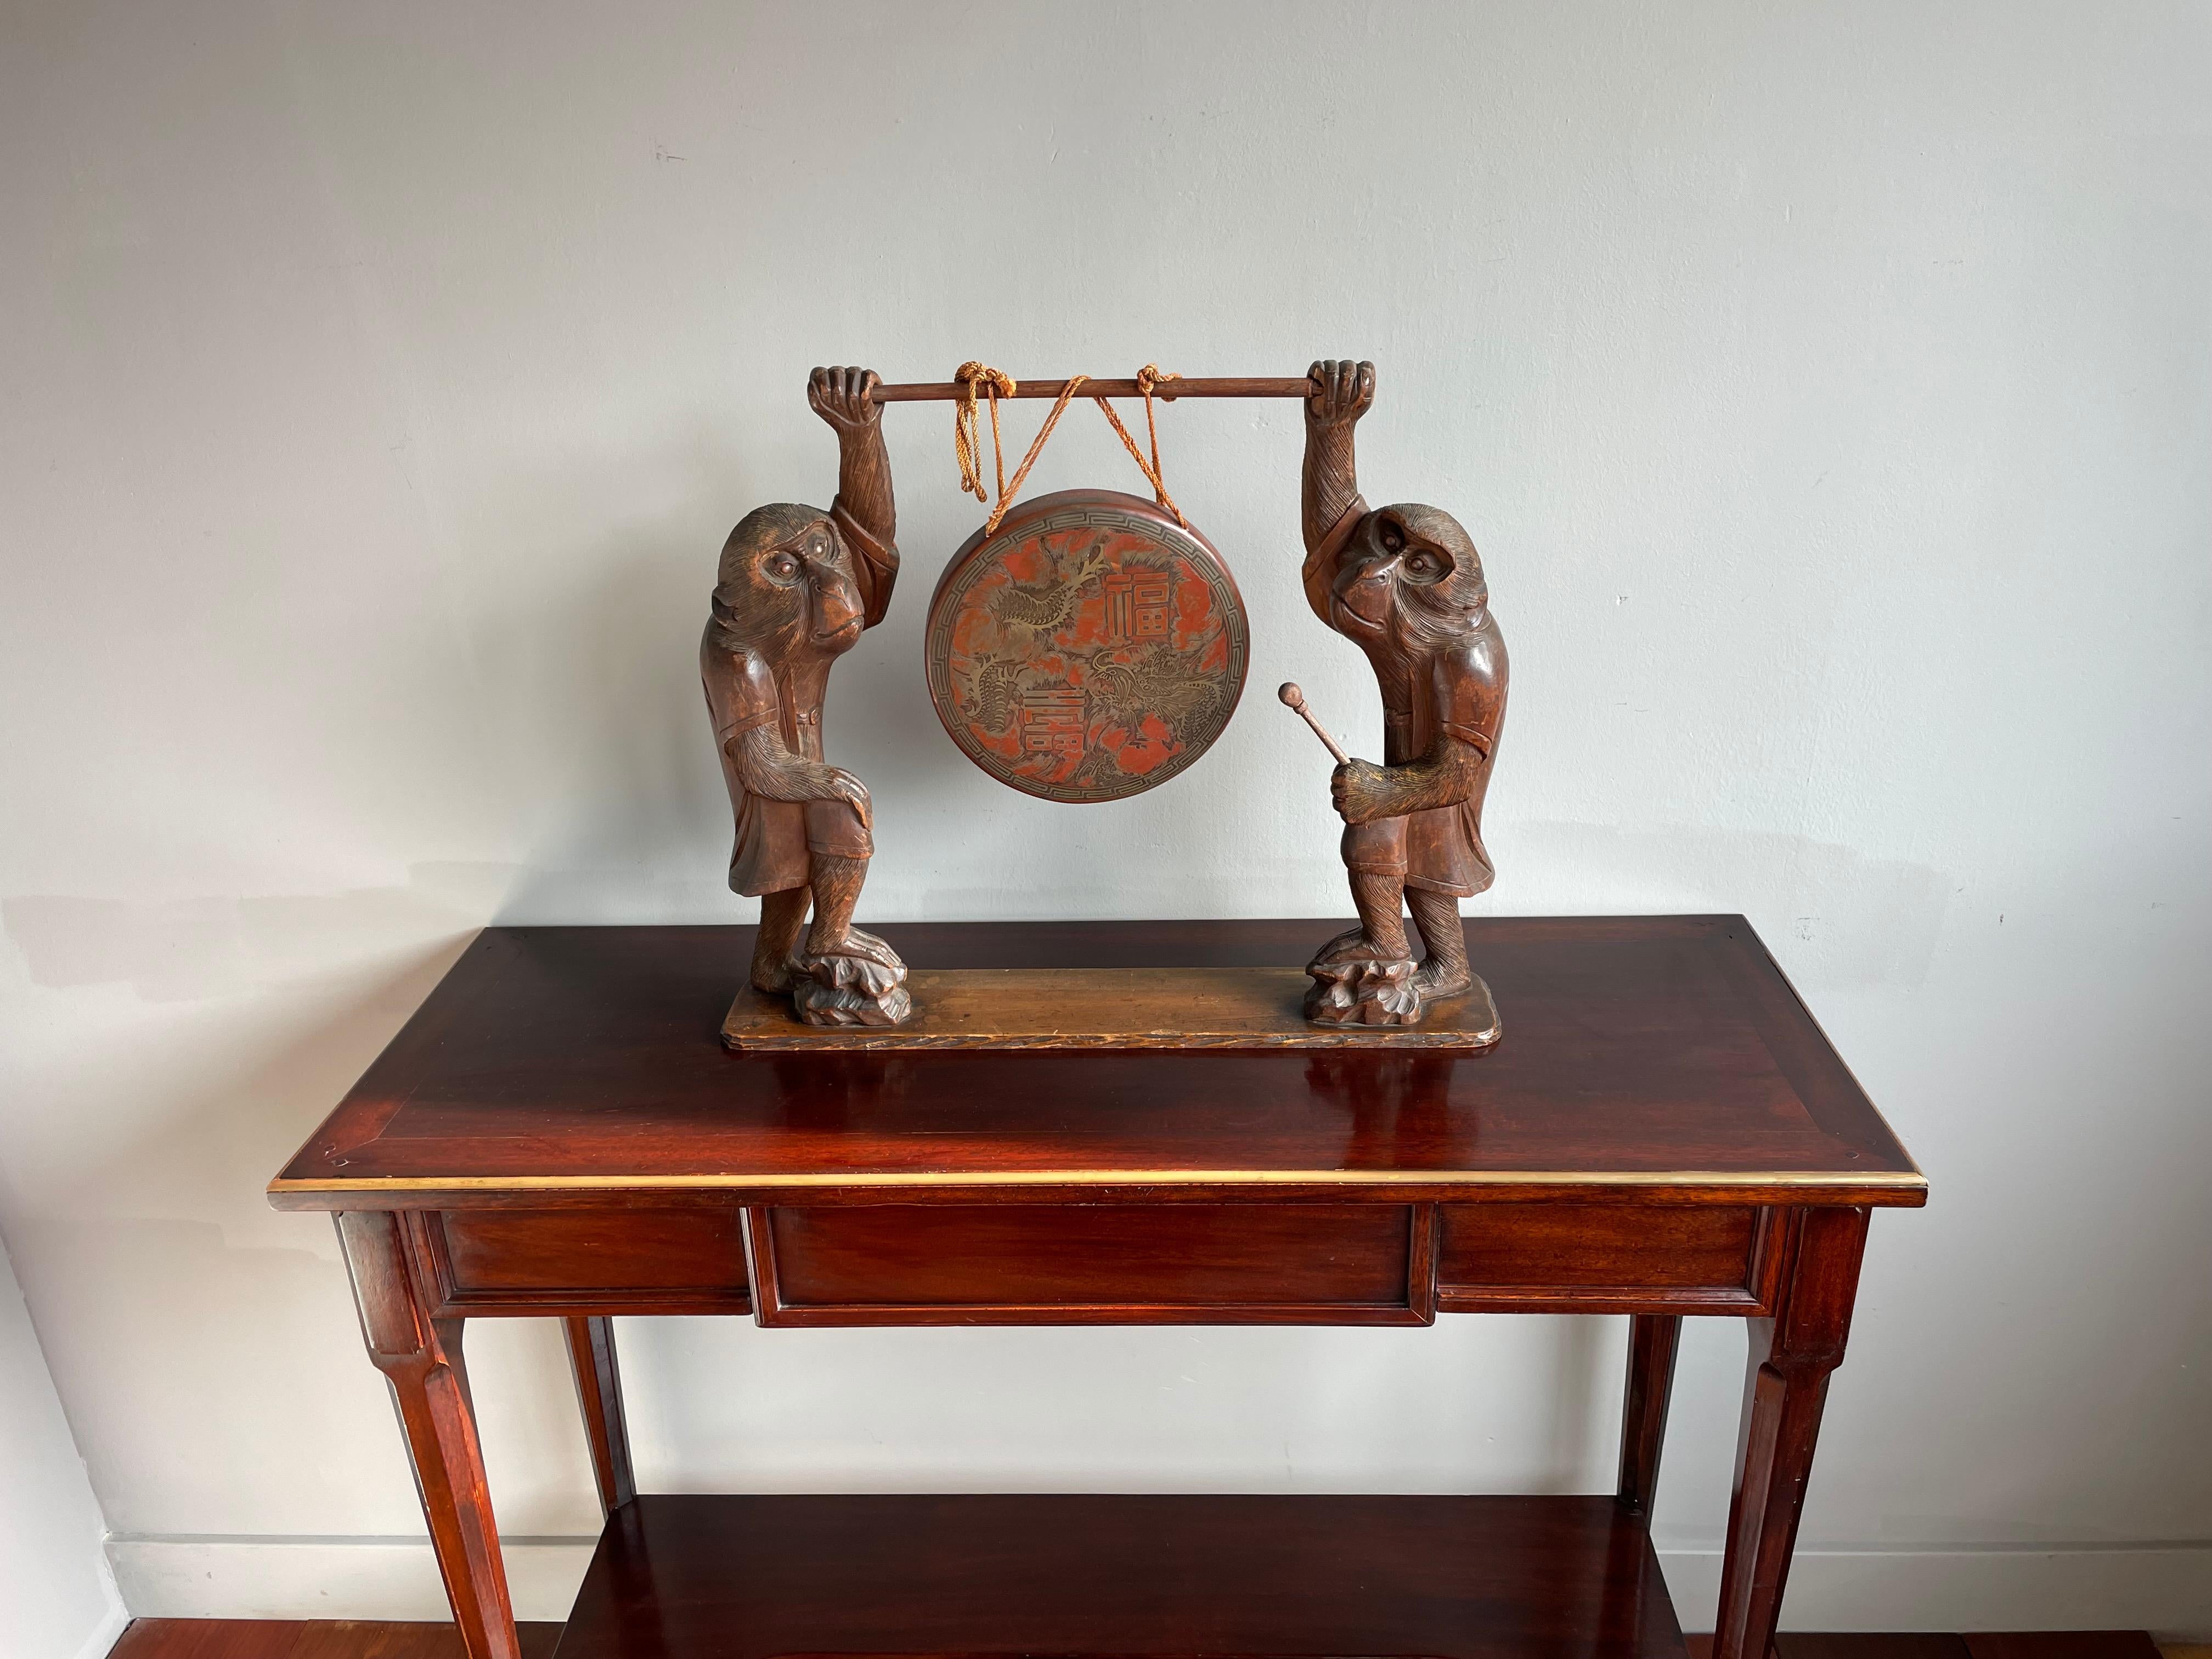 Rare and striking (no pun intended) Chinese bronze or brass gong with etched dragons.

This hand-crafted and sizeable Chinese table gong from the turn of the century (circa 1900) is both practical to use and a beautiful work of art to look at. The